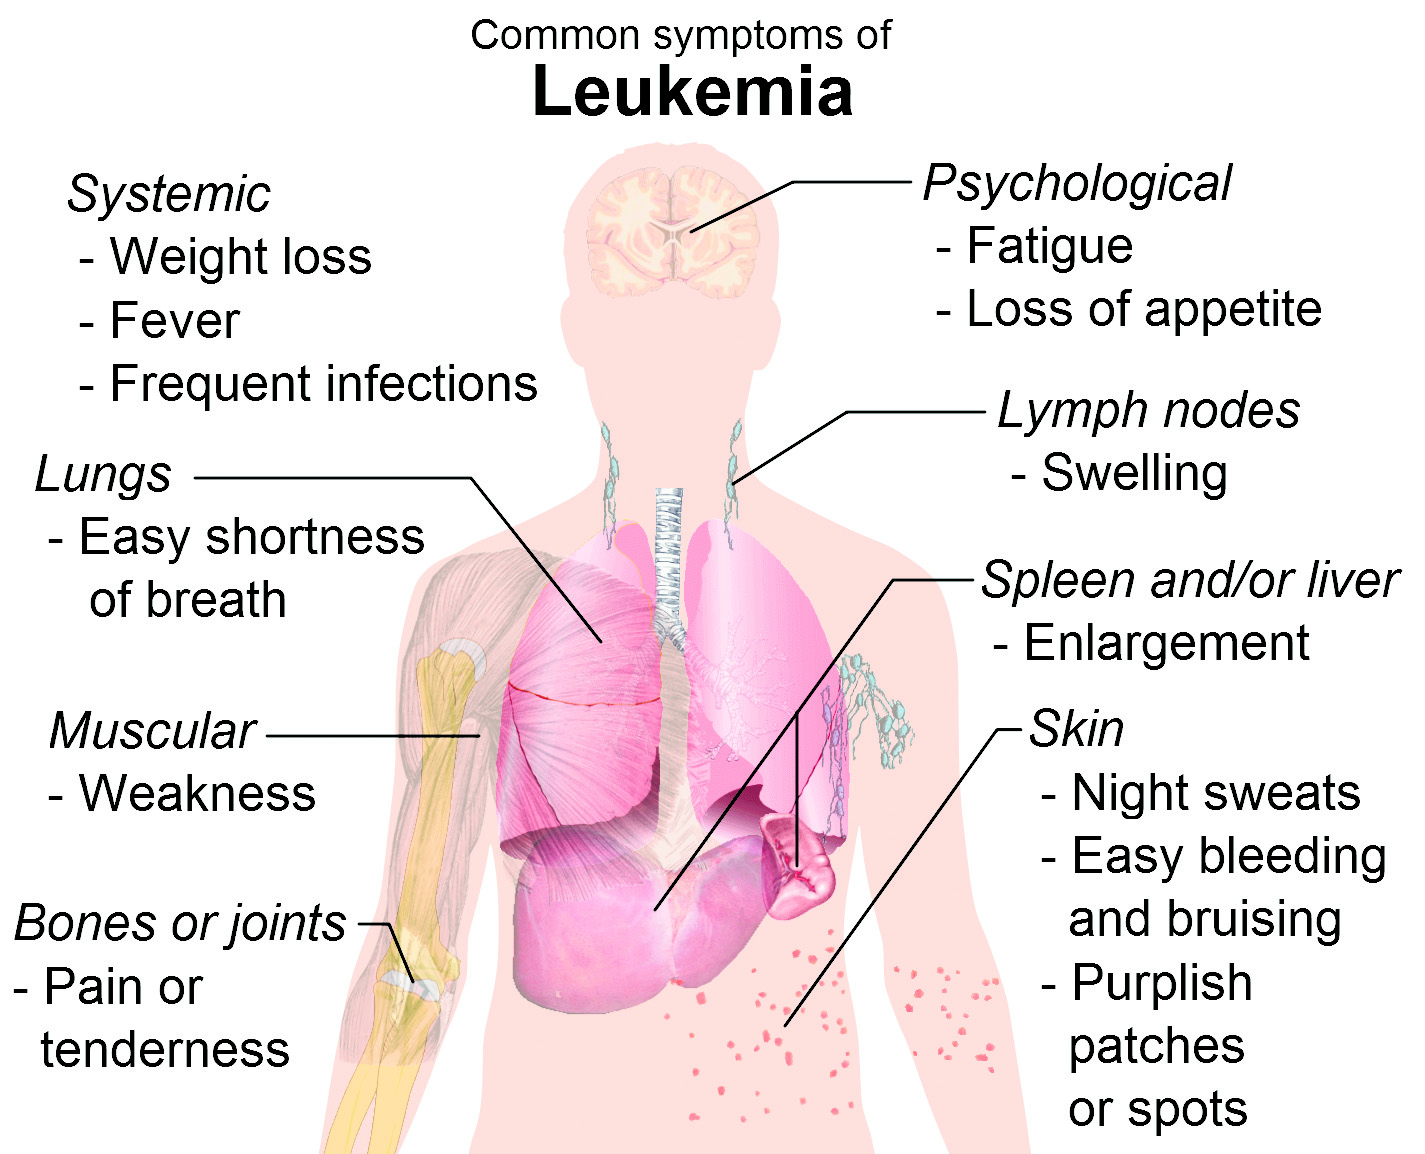 Childhood Leukaemia: Understanding the Causes, Prevalence and Treatment of the Disease